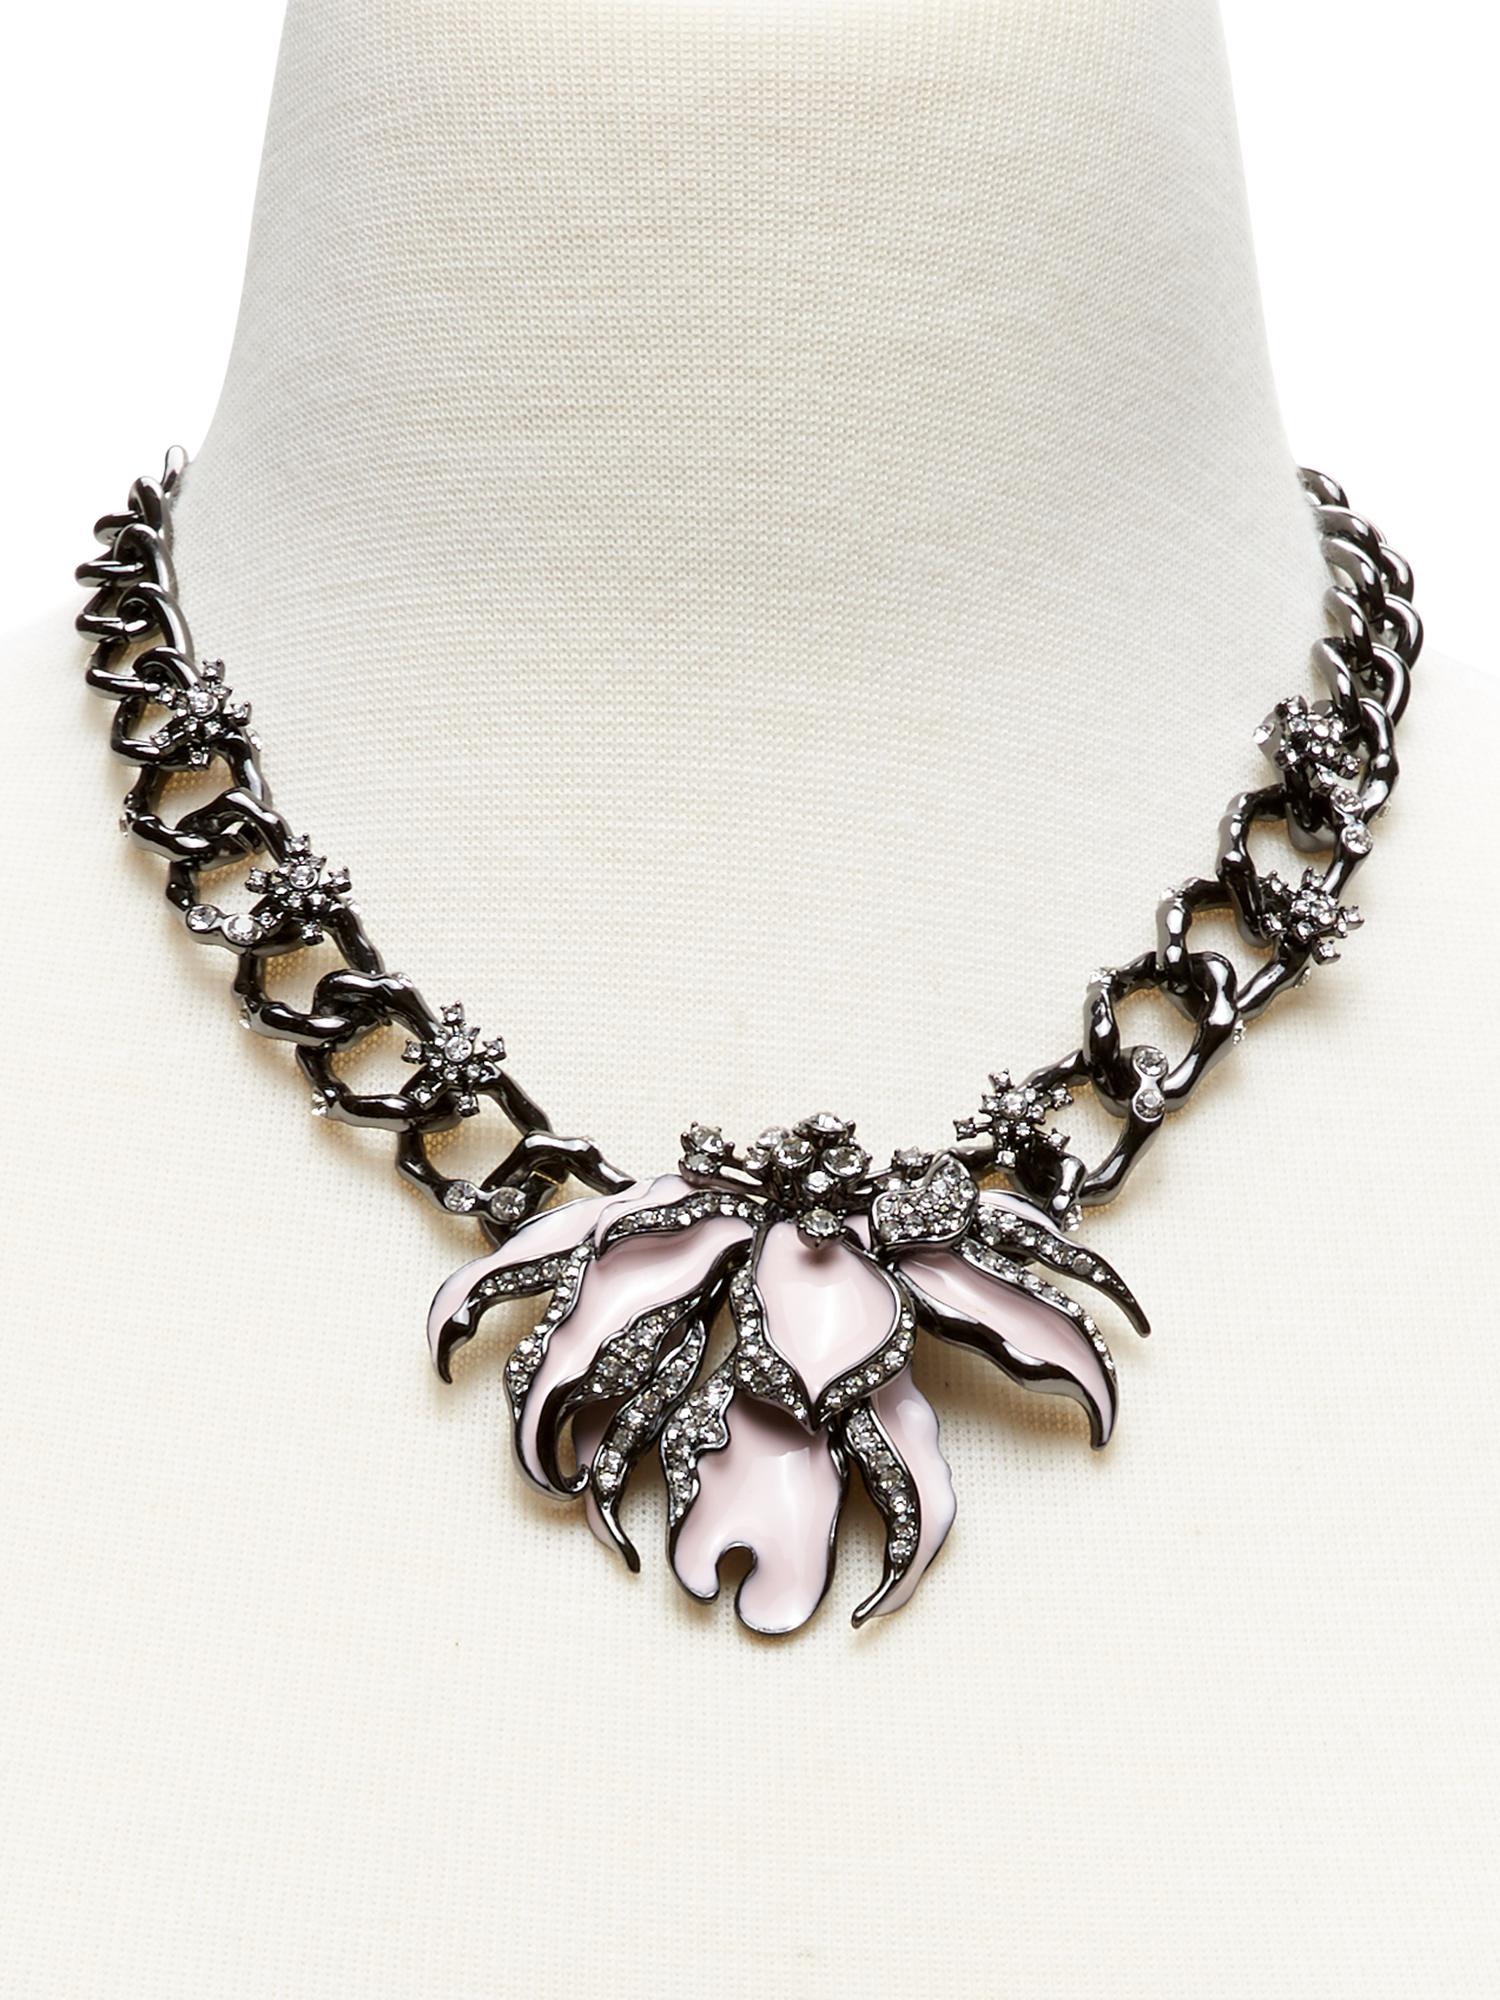 Wilted Flower Focal Necklace